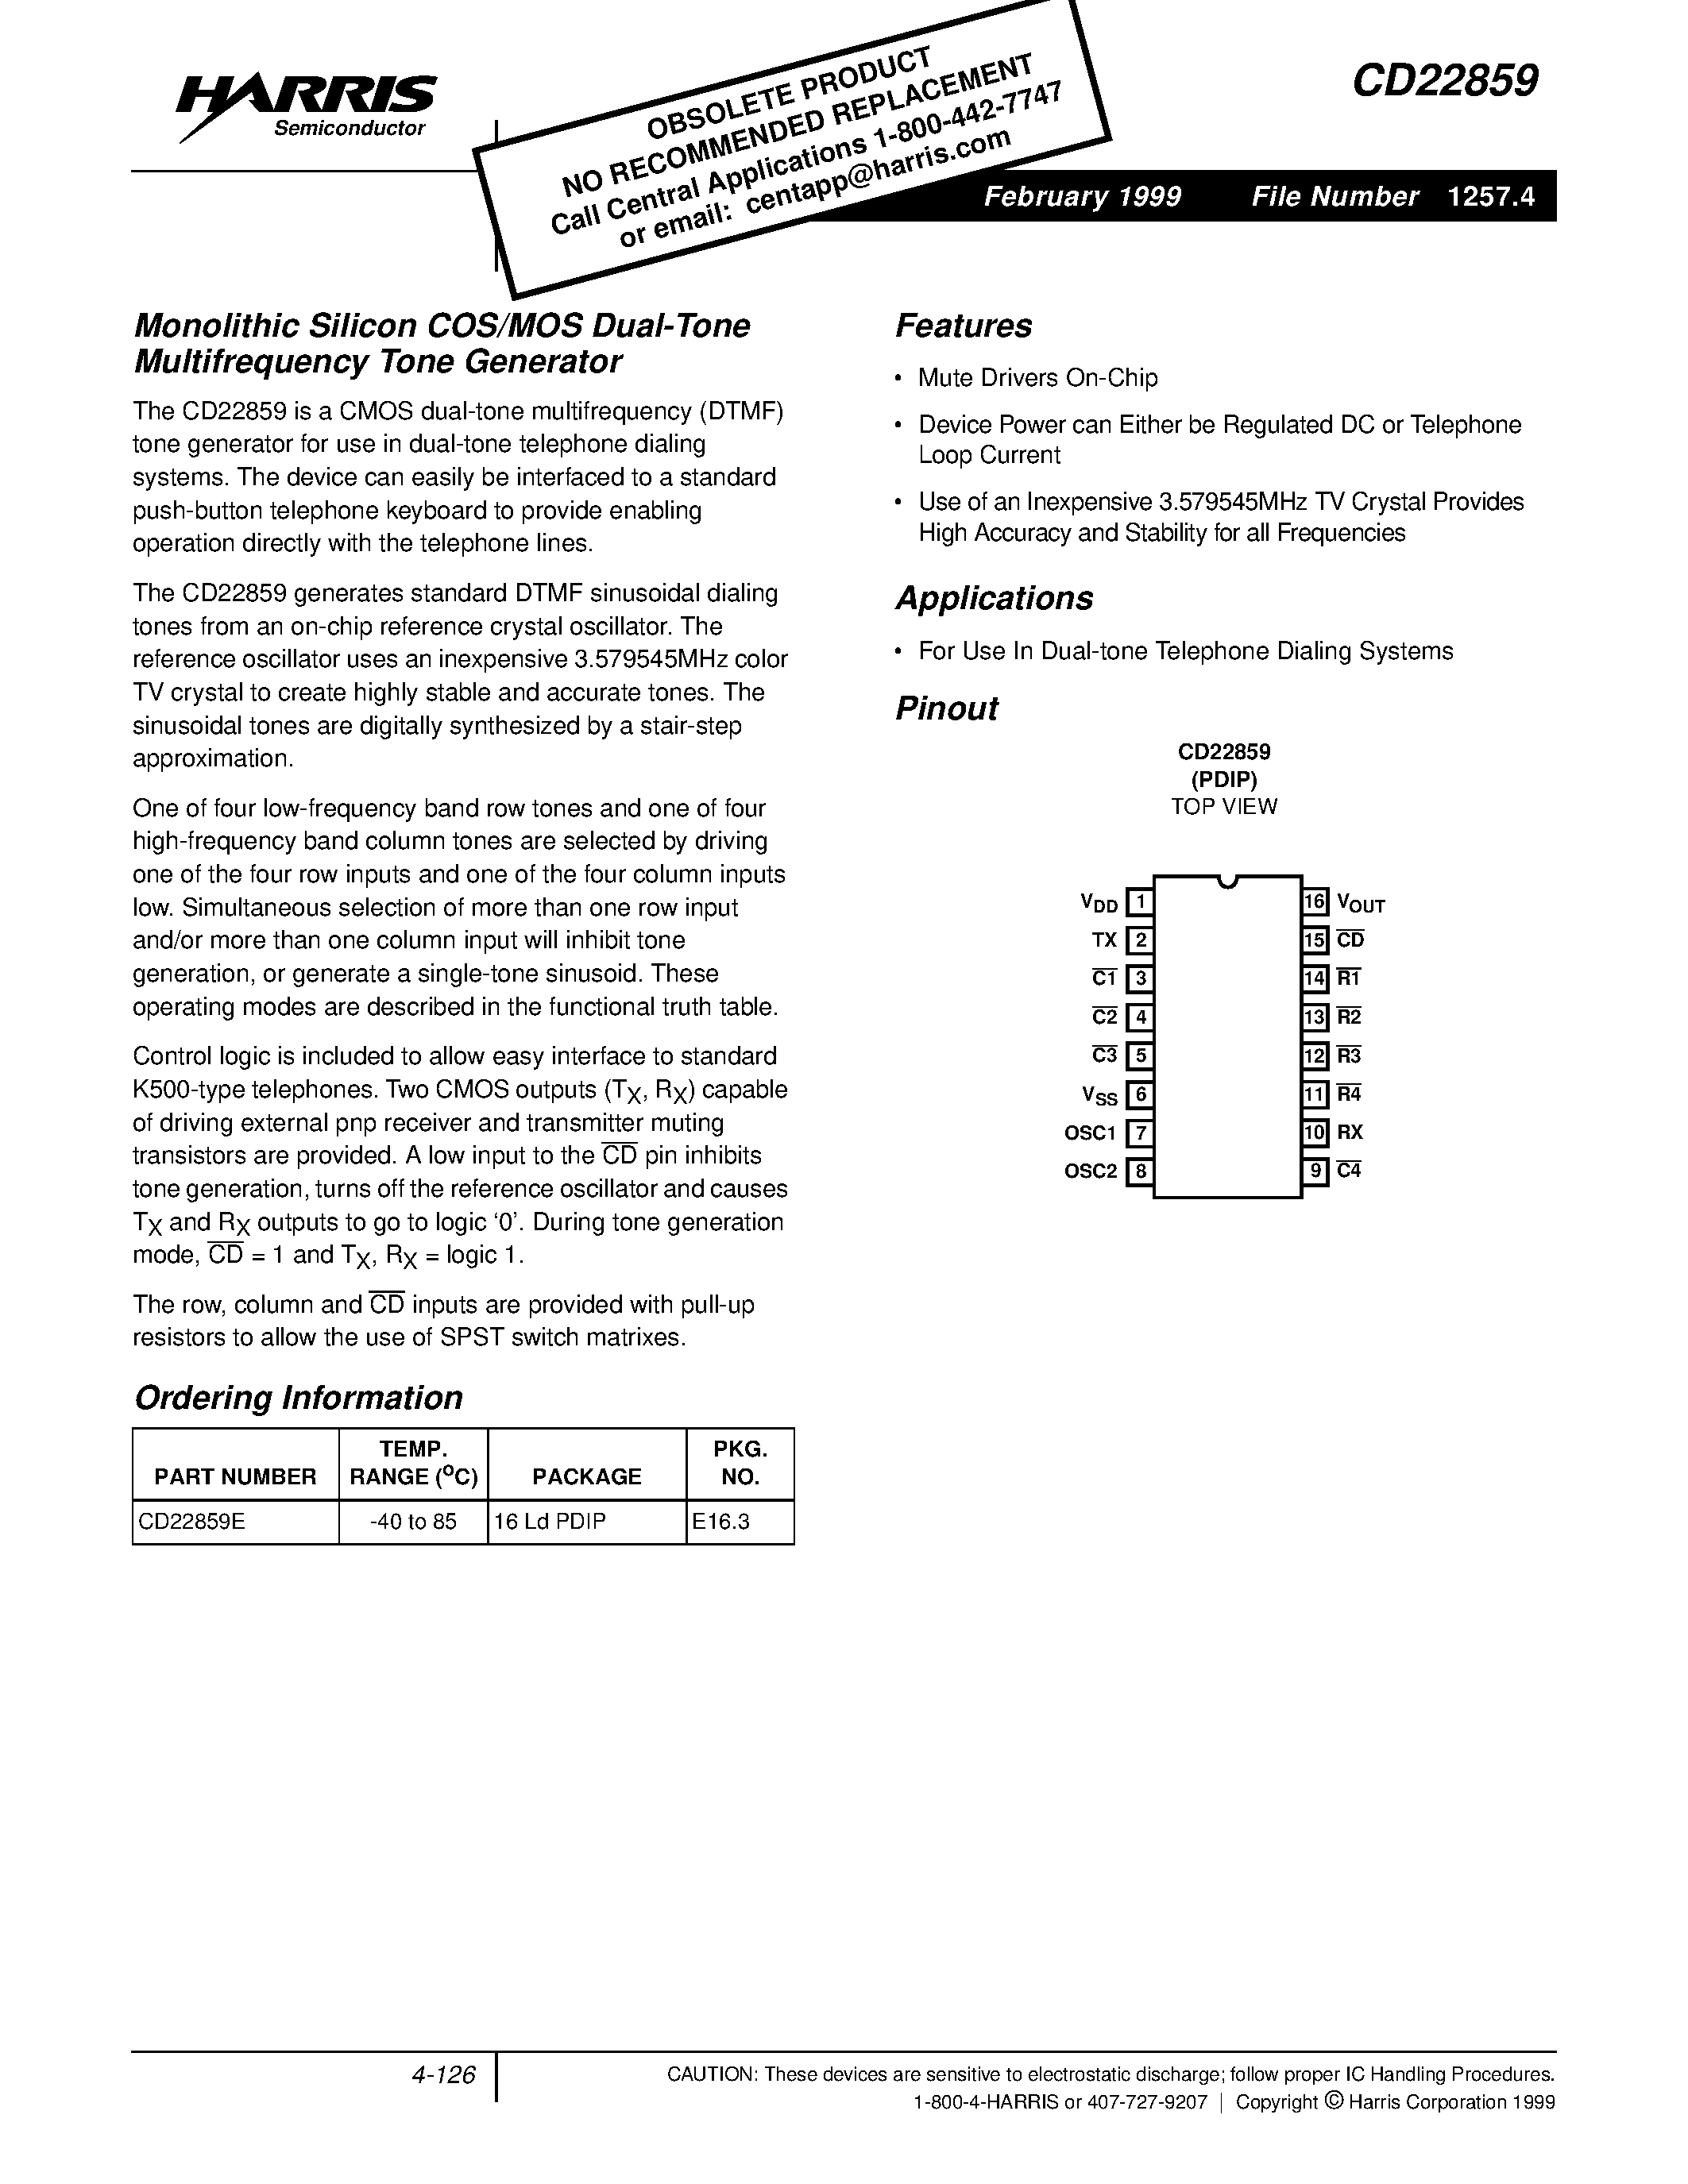 Datasheet CD22859 - Monolithic Silicon COS/MOS Dual-Tone Multifrequency Tone Generator page 1